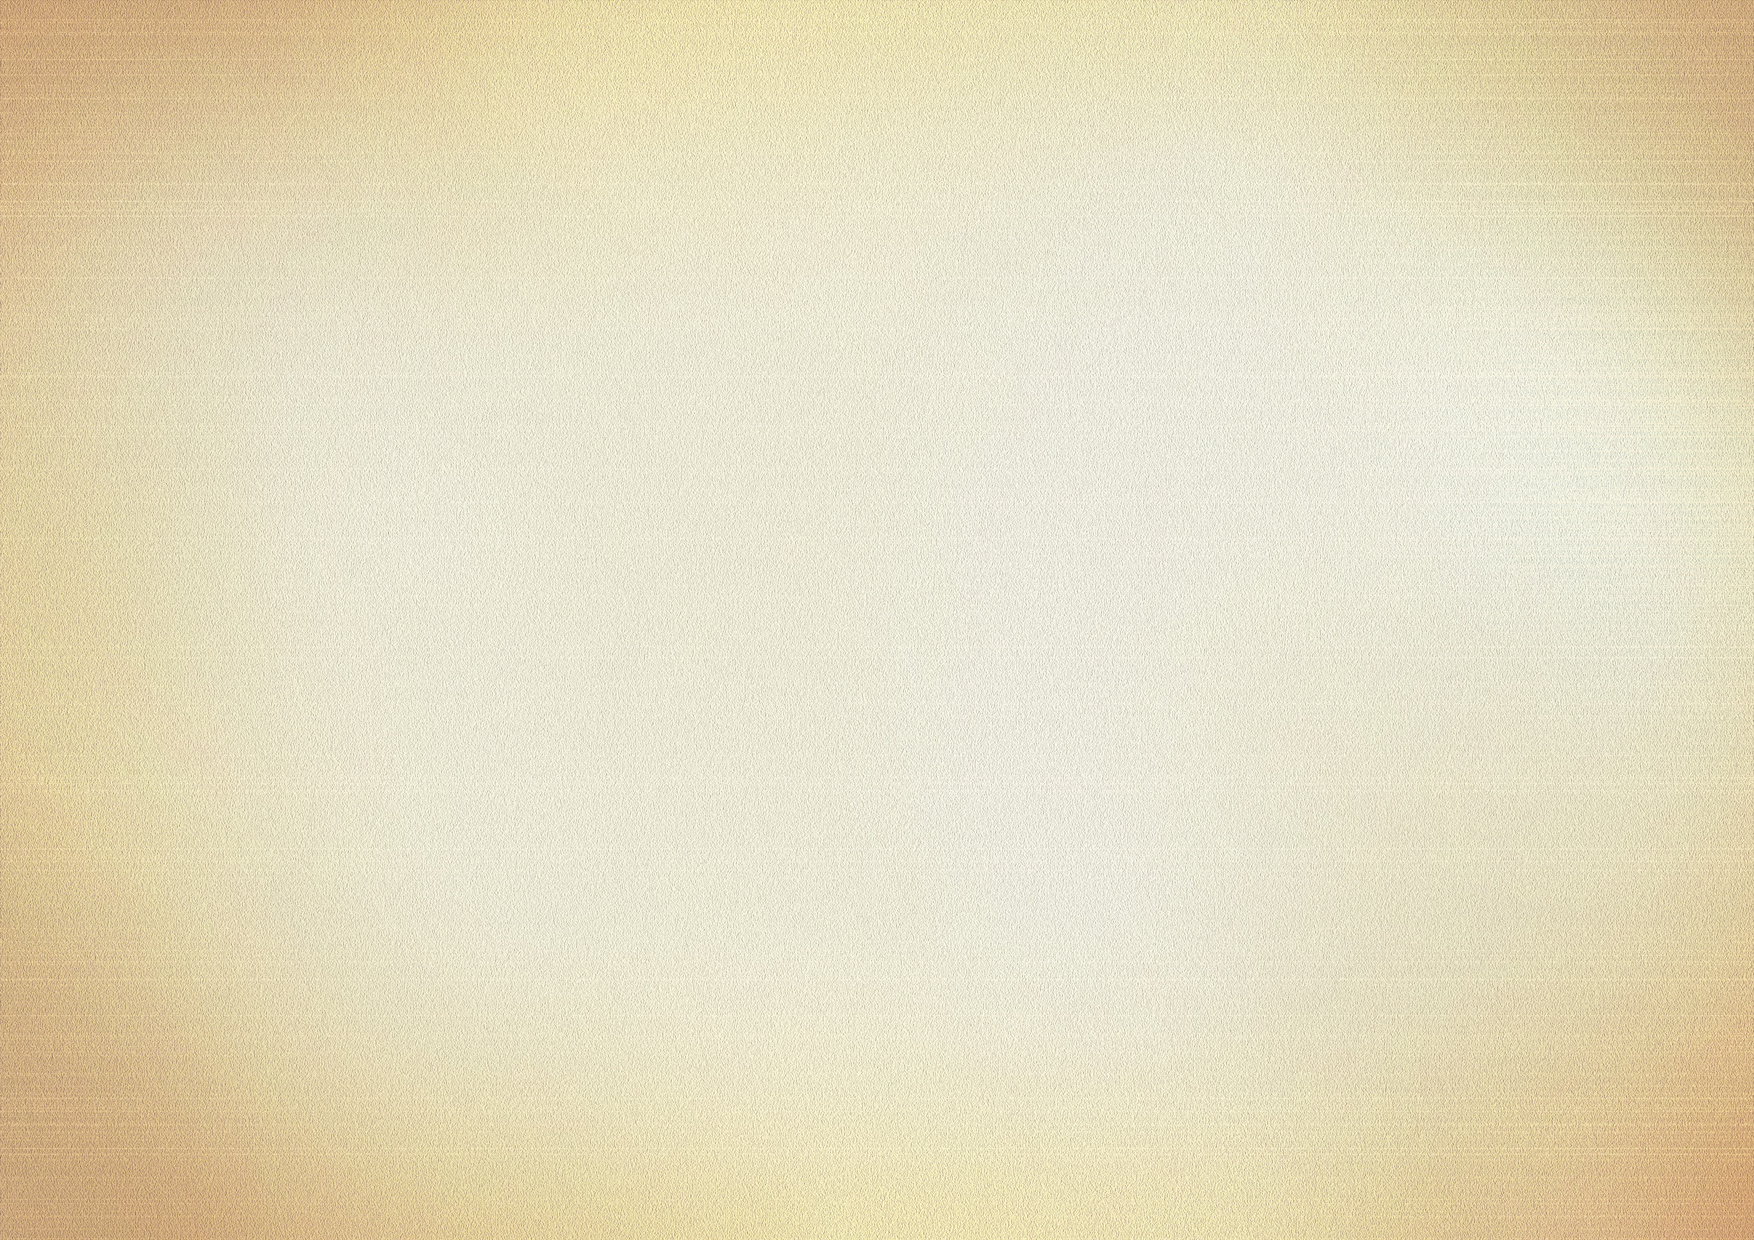 Old gold beige paper texture background.